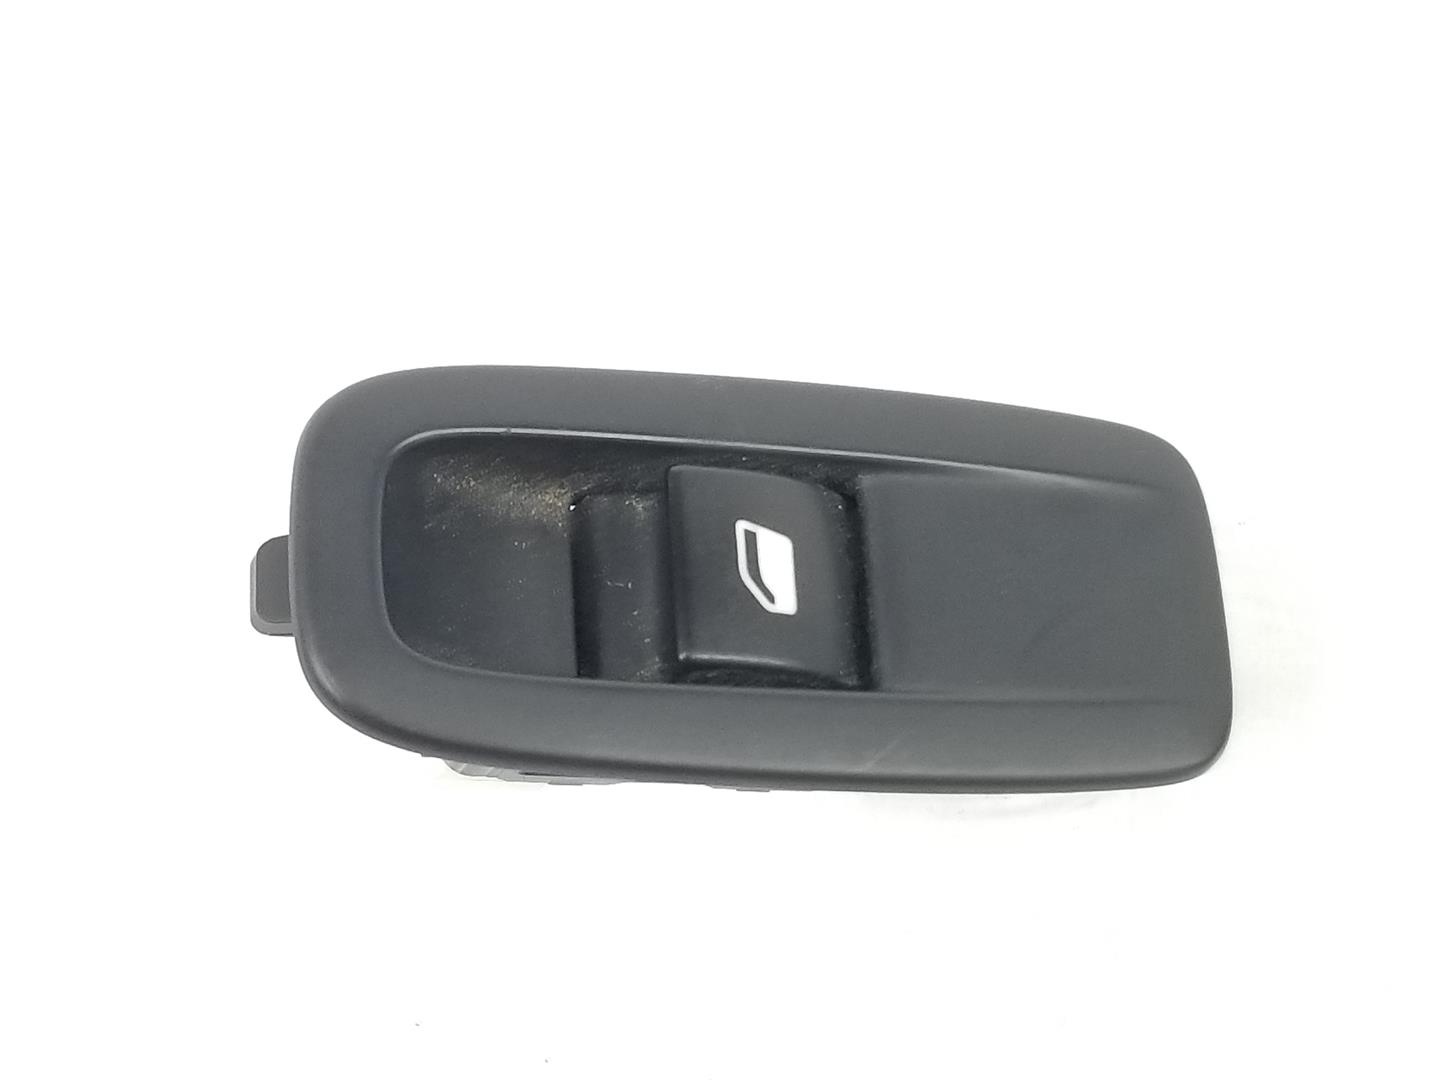 CITROËN C4 Picasso 2 generation (2013-2018) Rear Right Door Window Control Switch 96762299ZD, 96762299ZD 24124452